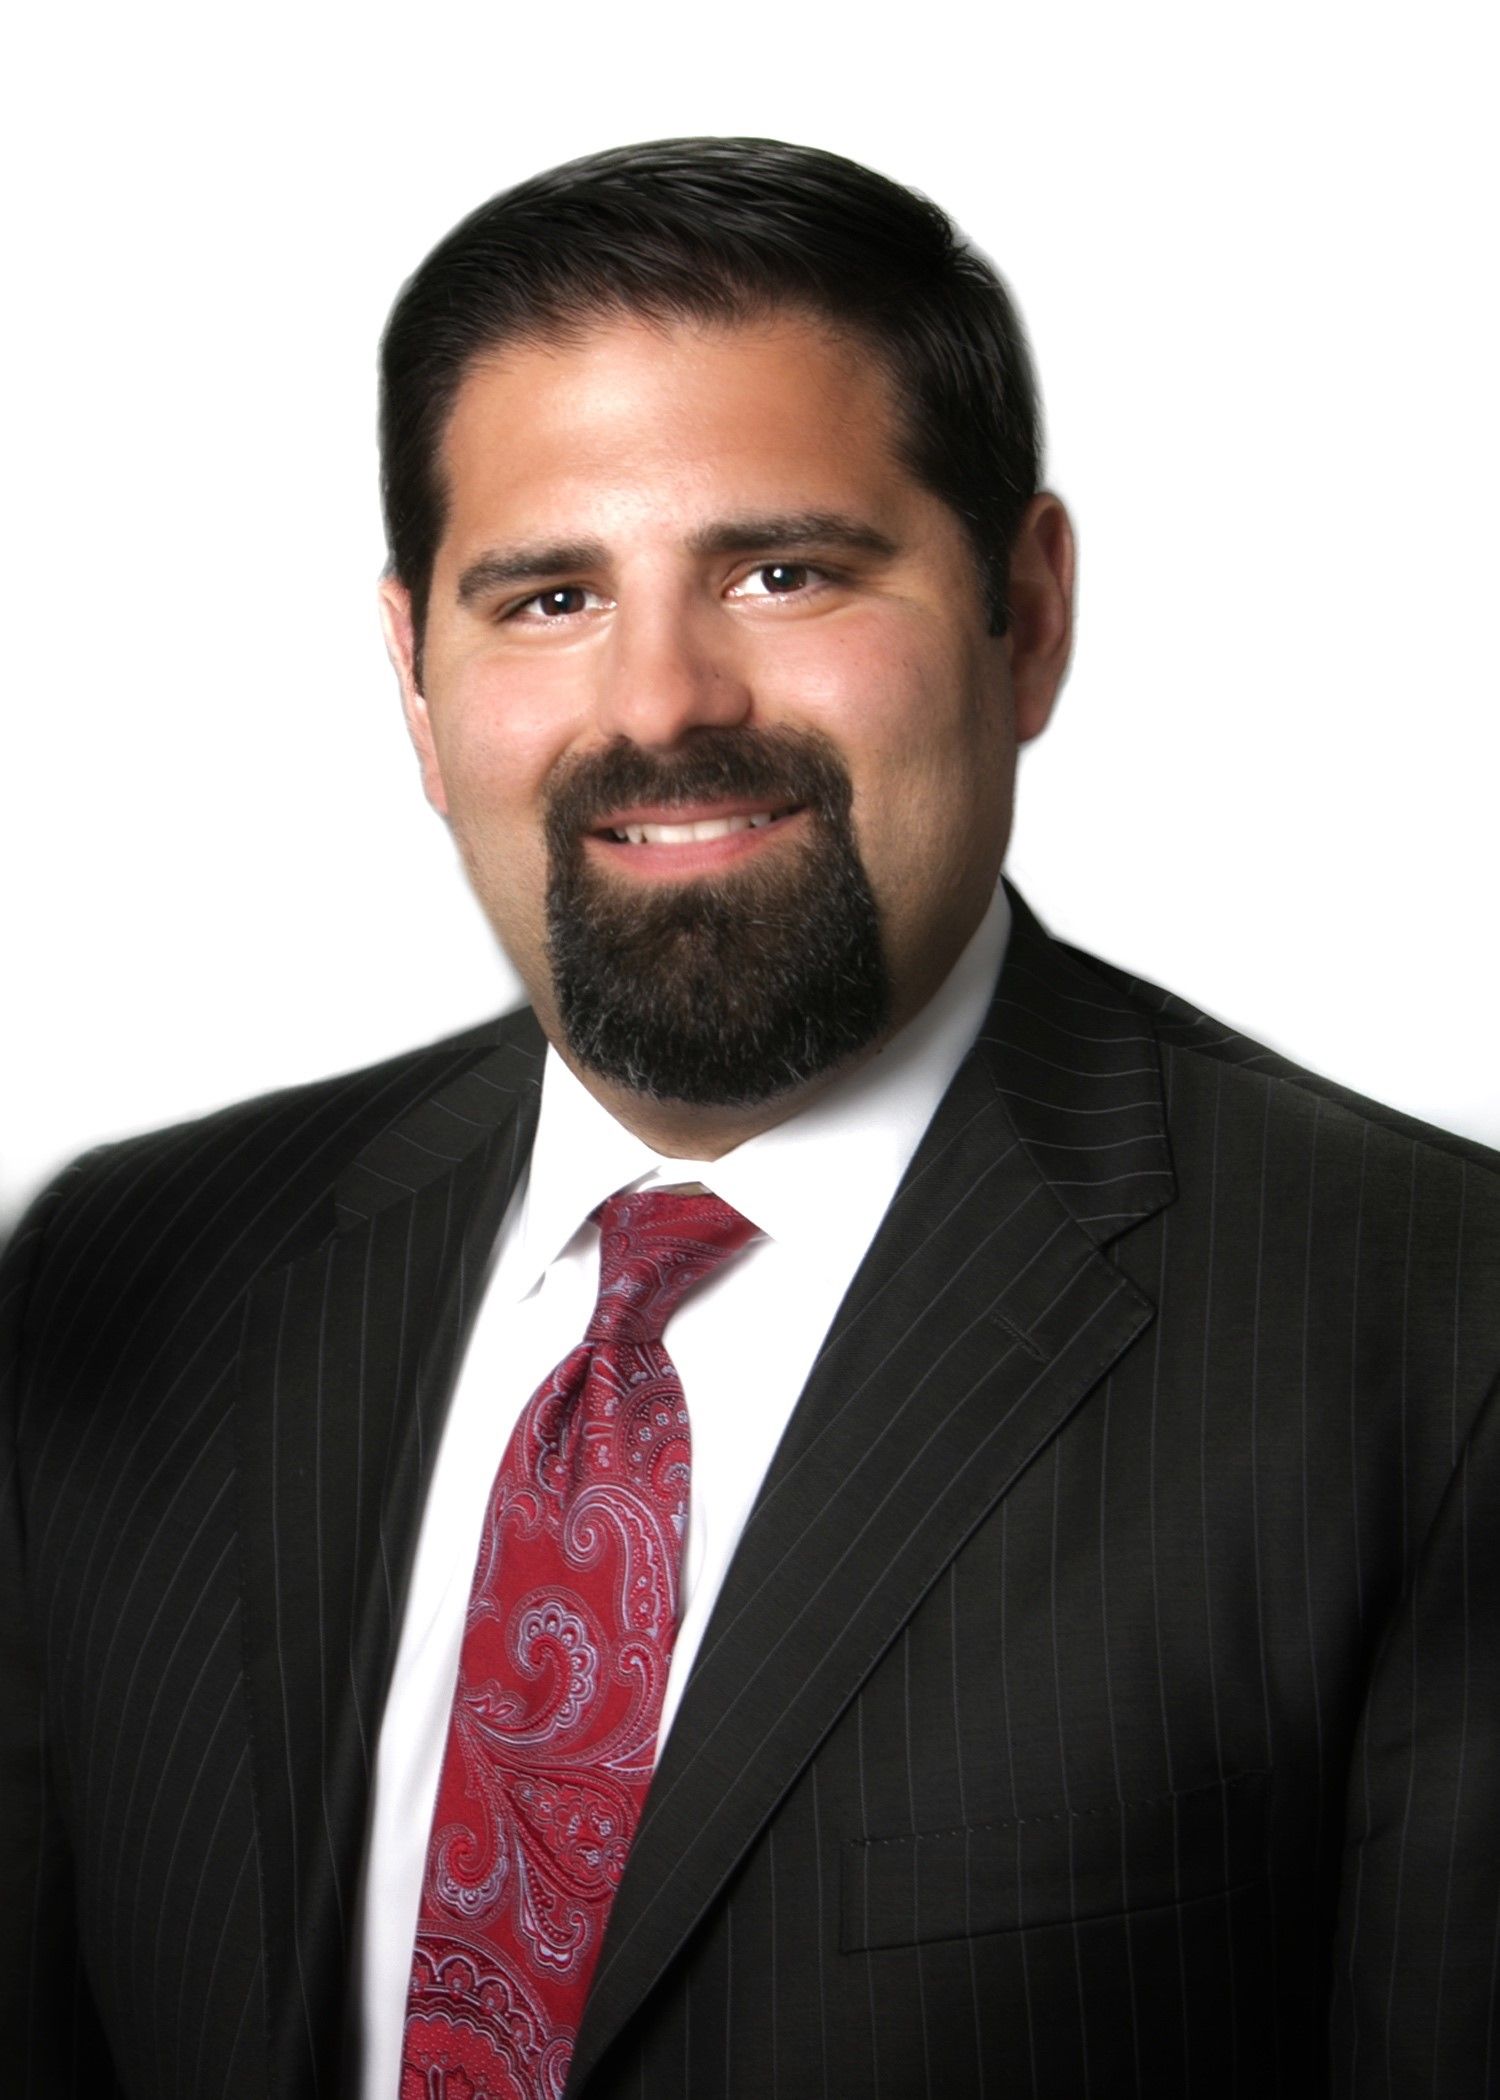 Jax Federal Credit Union Appoints Charlie Saman as Vice President of Business Services